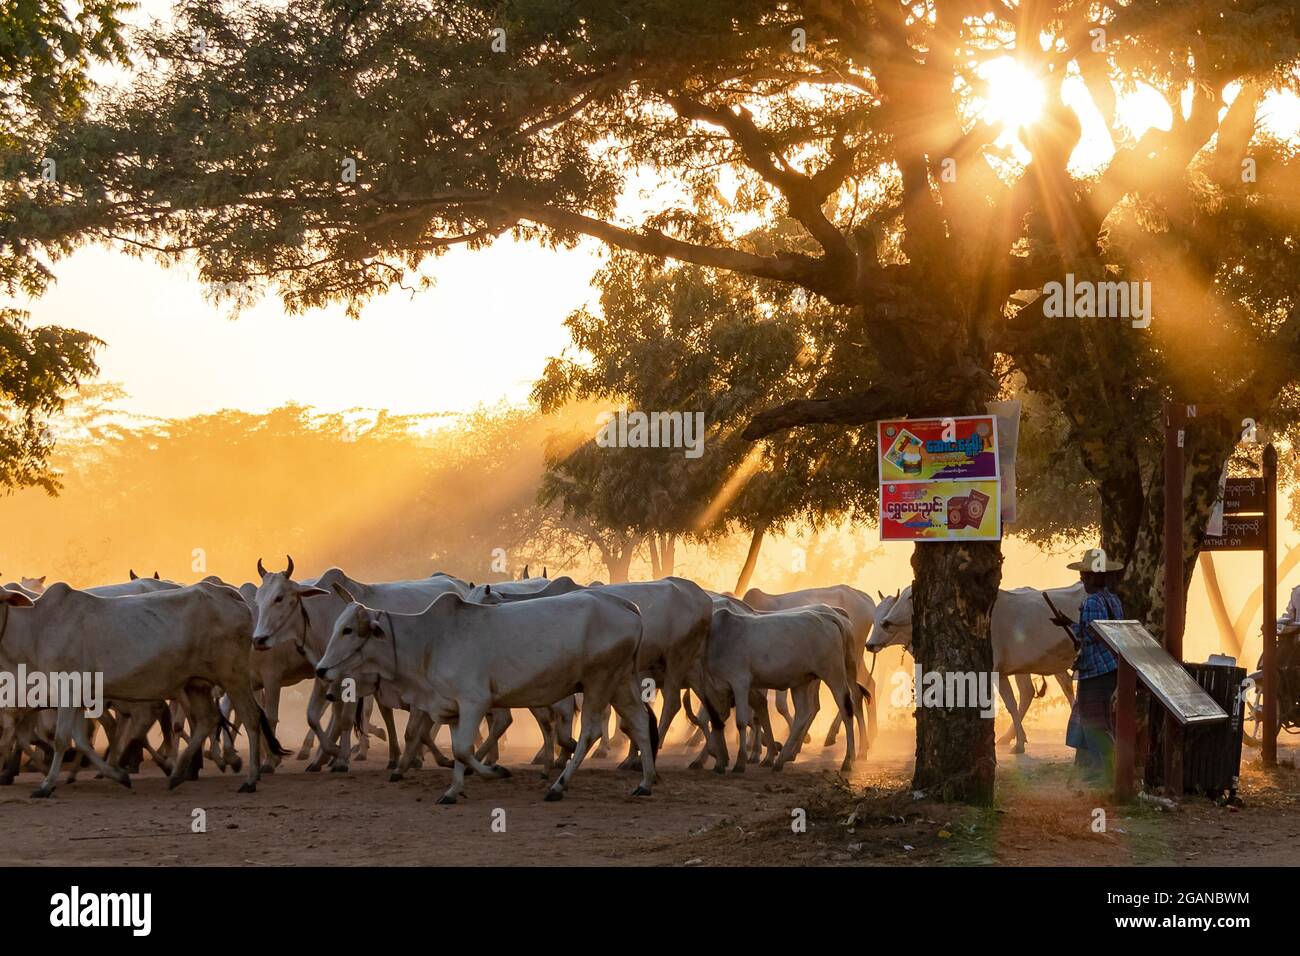 In the dust and backlight, a farmer drives his cattle across a street in the temple complex of Bagan in Myanmar Stock Photo